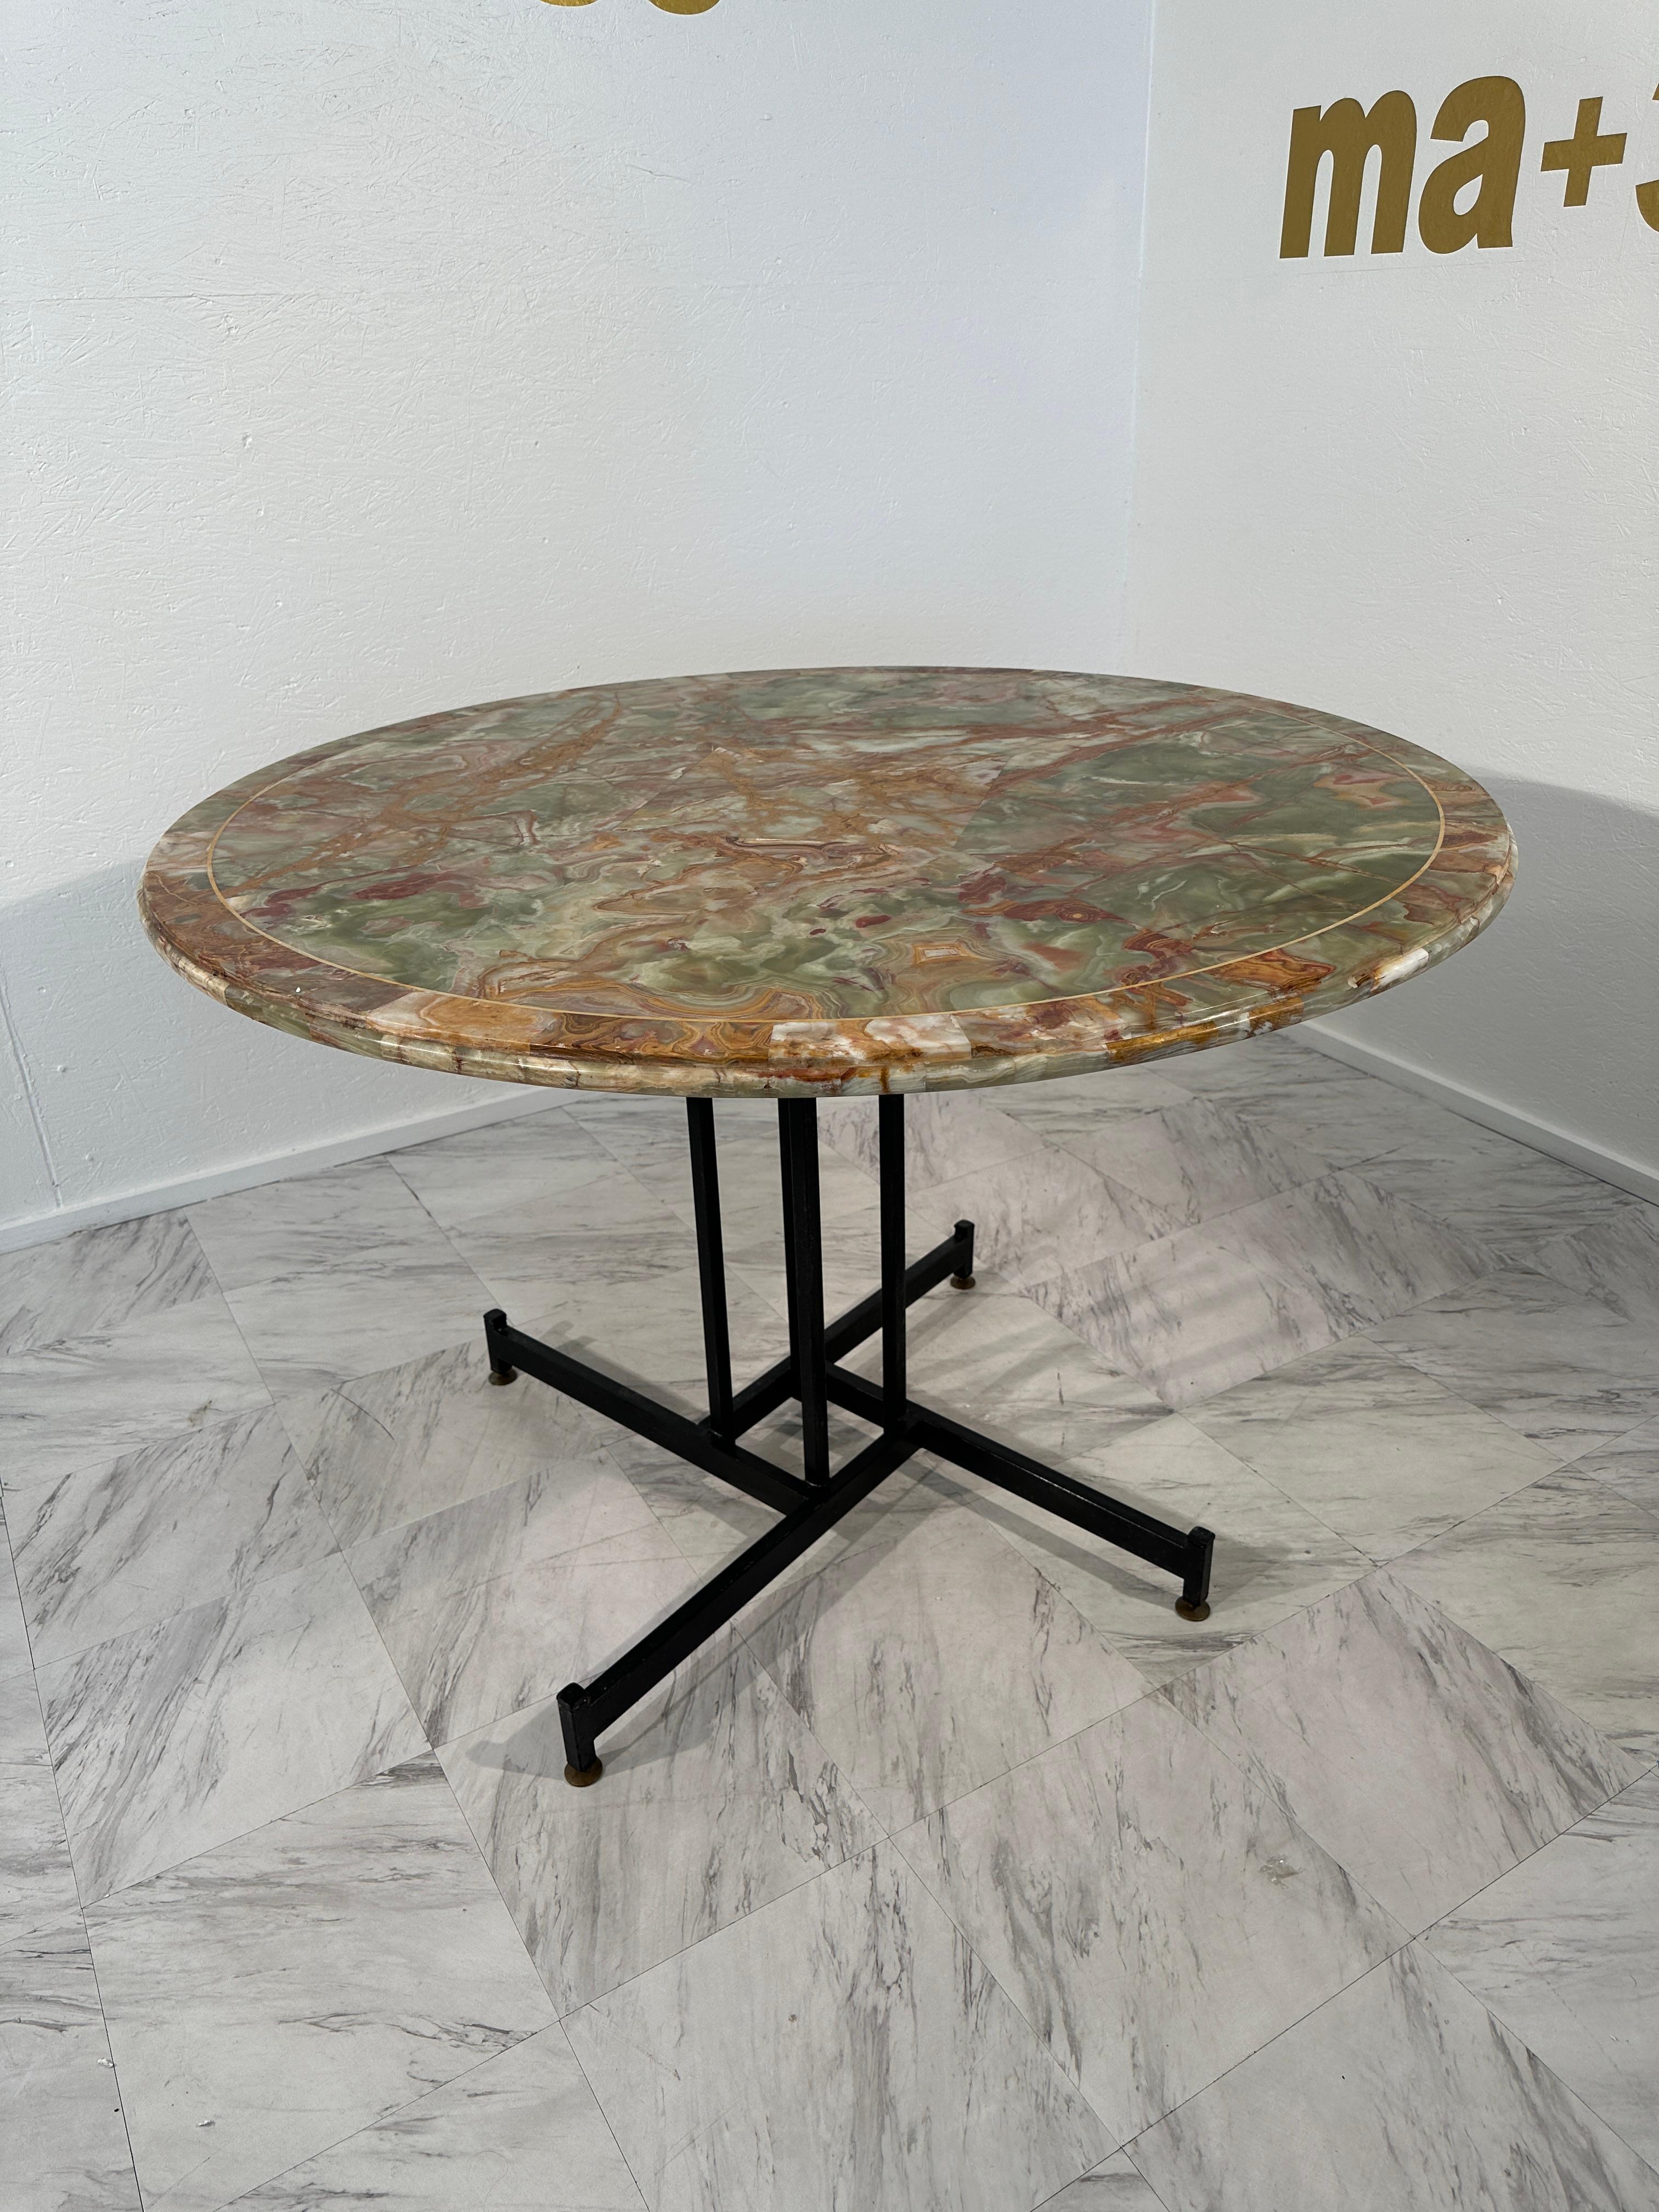 The Mid Century Italian Round Table by Ignazio Gardella, crafted in the 1950s, is an exquisite piece characterized by its elegant design and quality materials. The table features a round top made of luxurious onyx marble, showcasing intricate